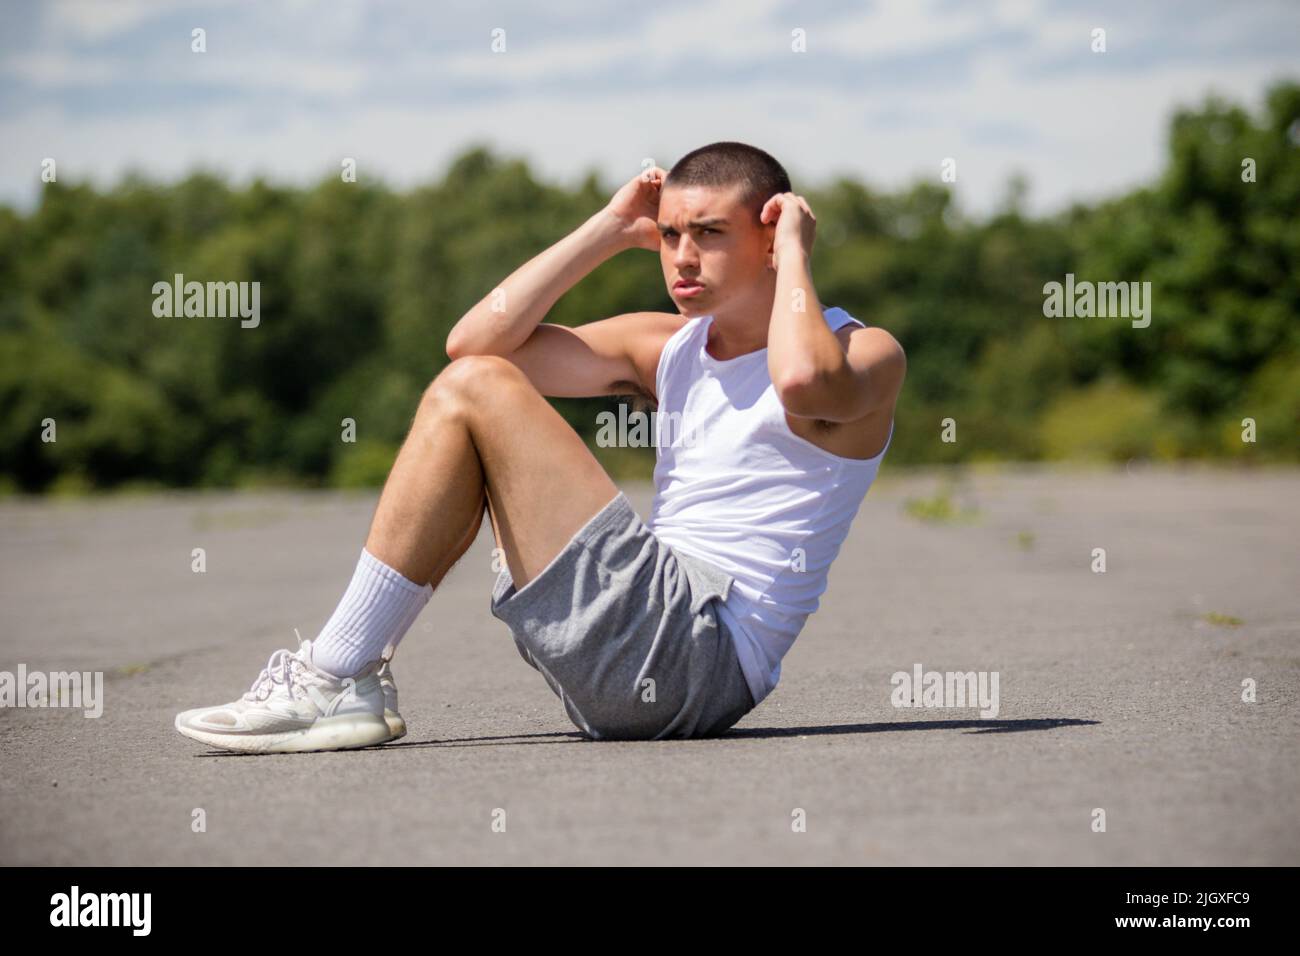 A Nineteen Year Old Teenage Boy Doing Situps In A Public Park Stock ...